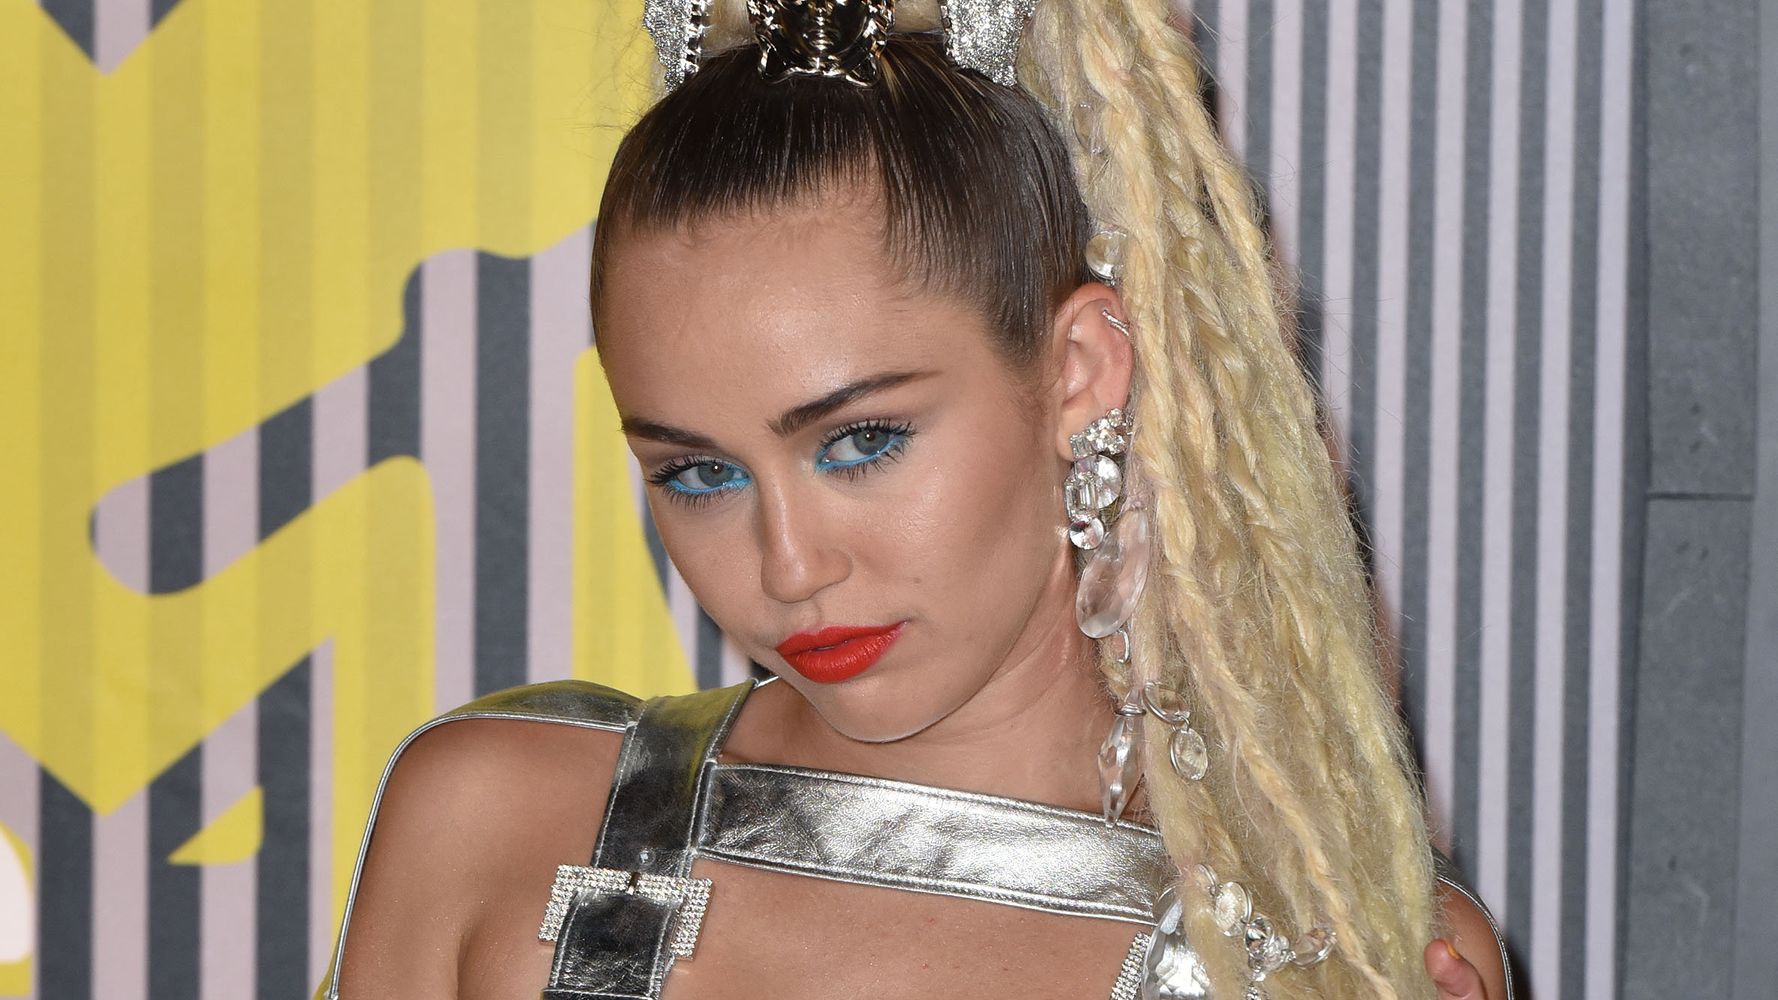 Real Lesbian Porn Miley Cyrus - You've Probably Never Heard Lesbian Sex Described The Way Miley Is  Describing It | HuffPost Voices